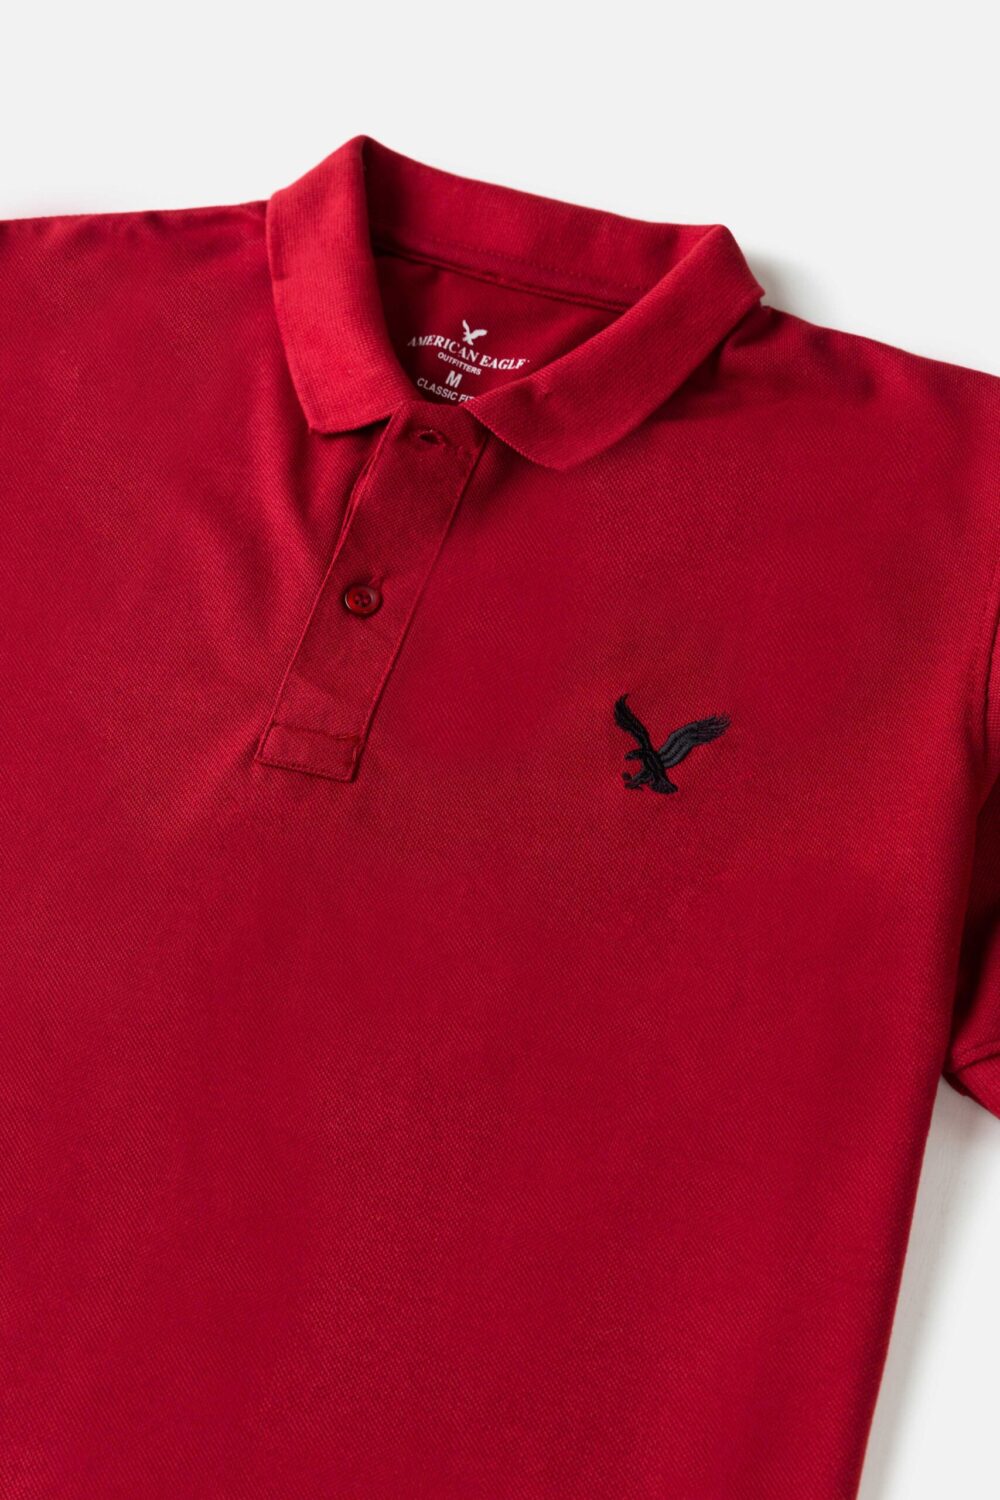 AE Imported Pique Polo shirt – Blood Red